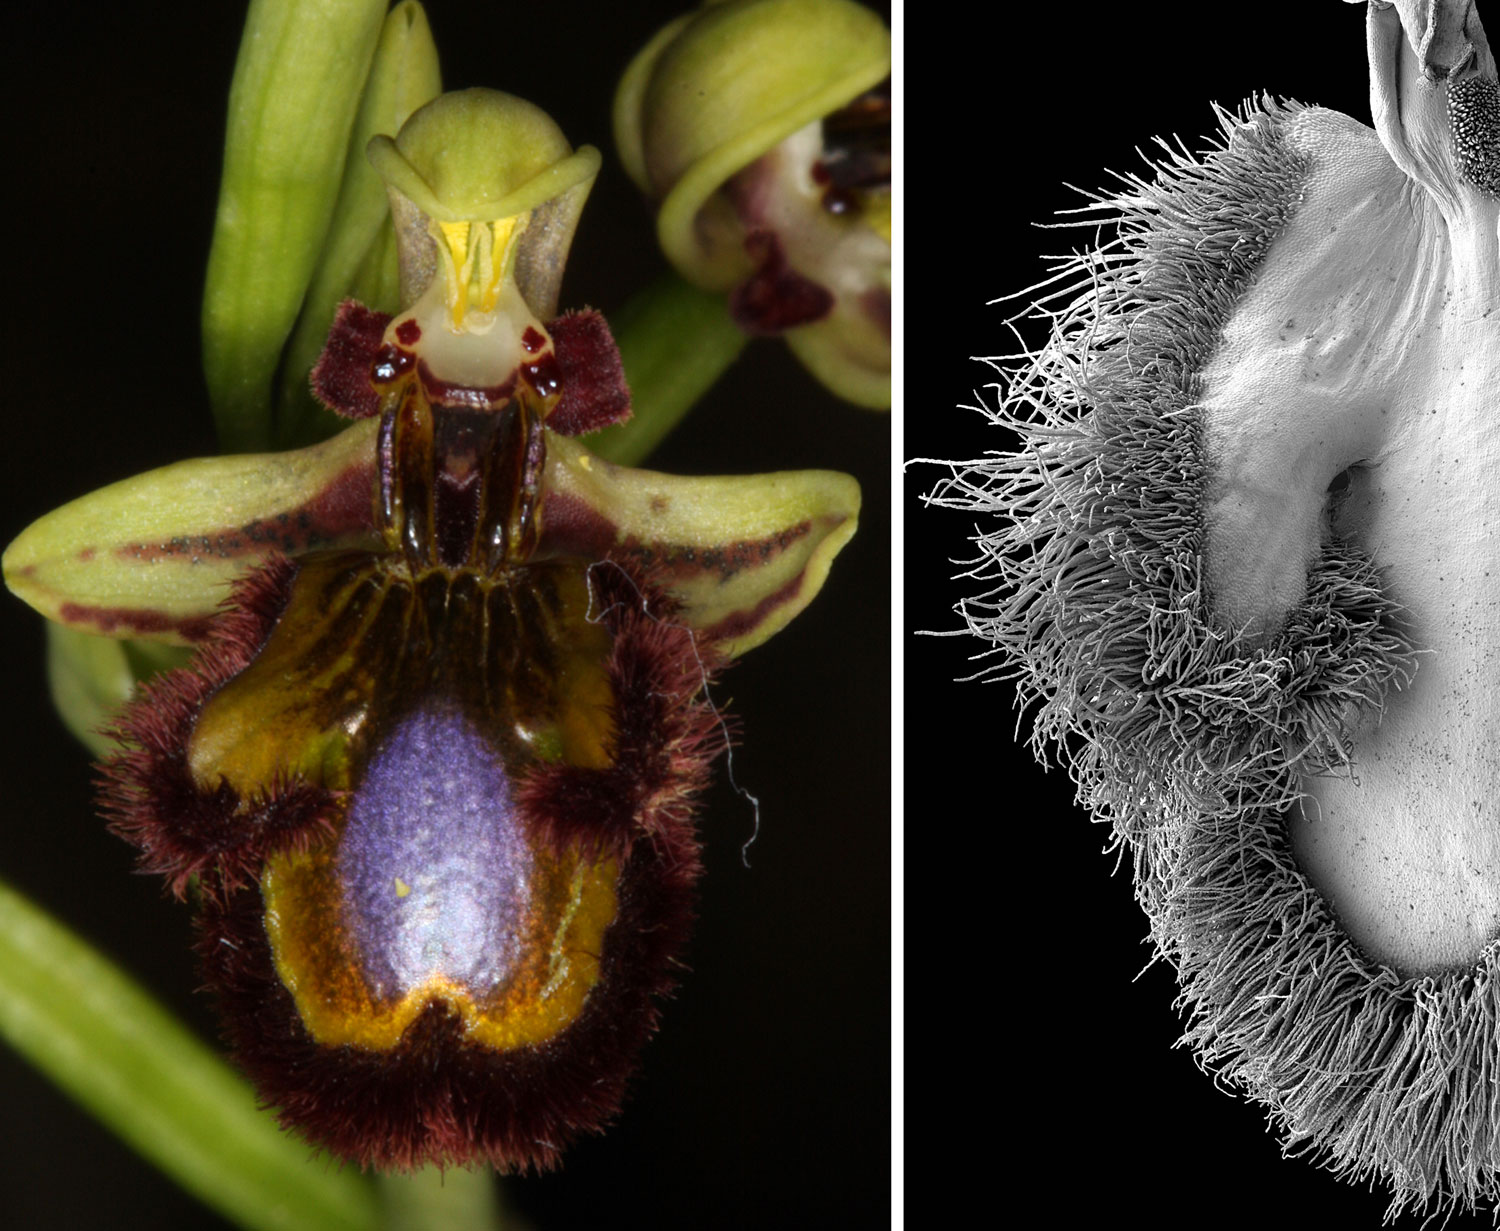 Left is the flower of a mirror orchid; right is part of the flower under scanning electron microscope